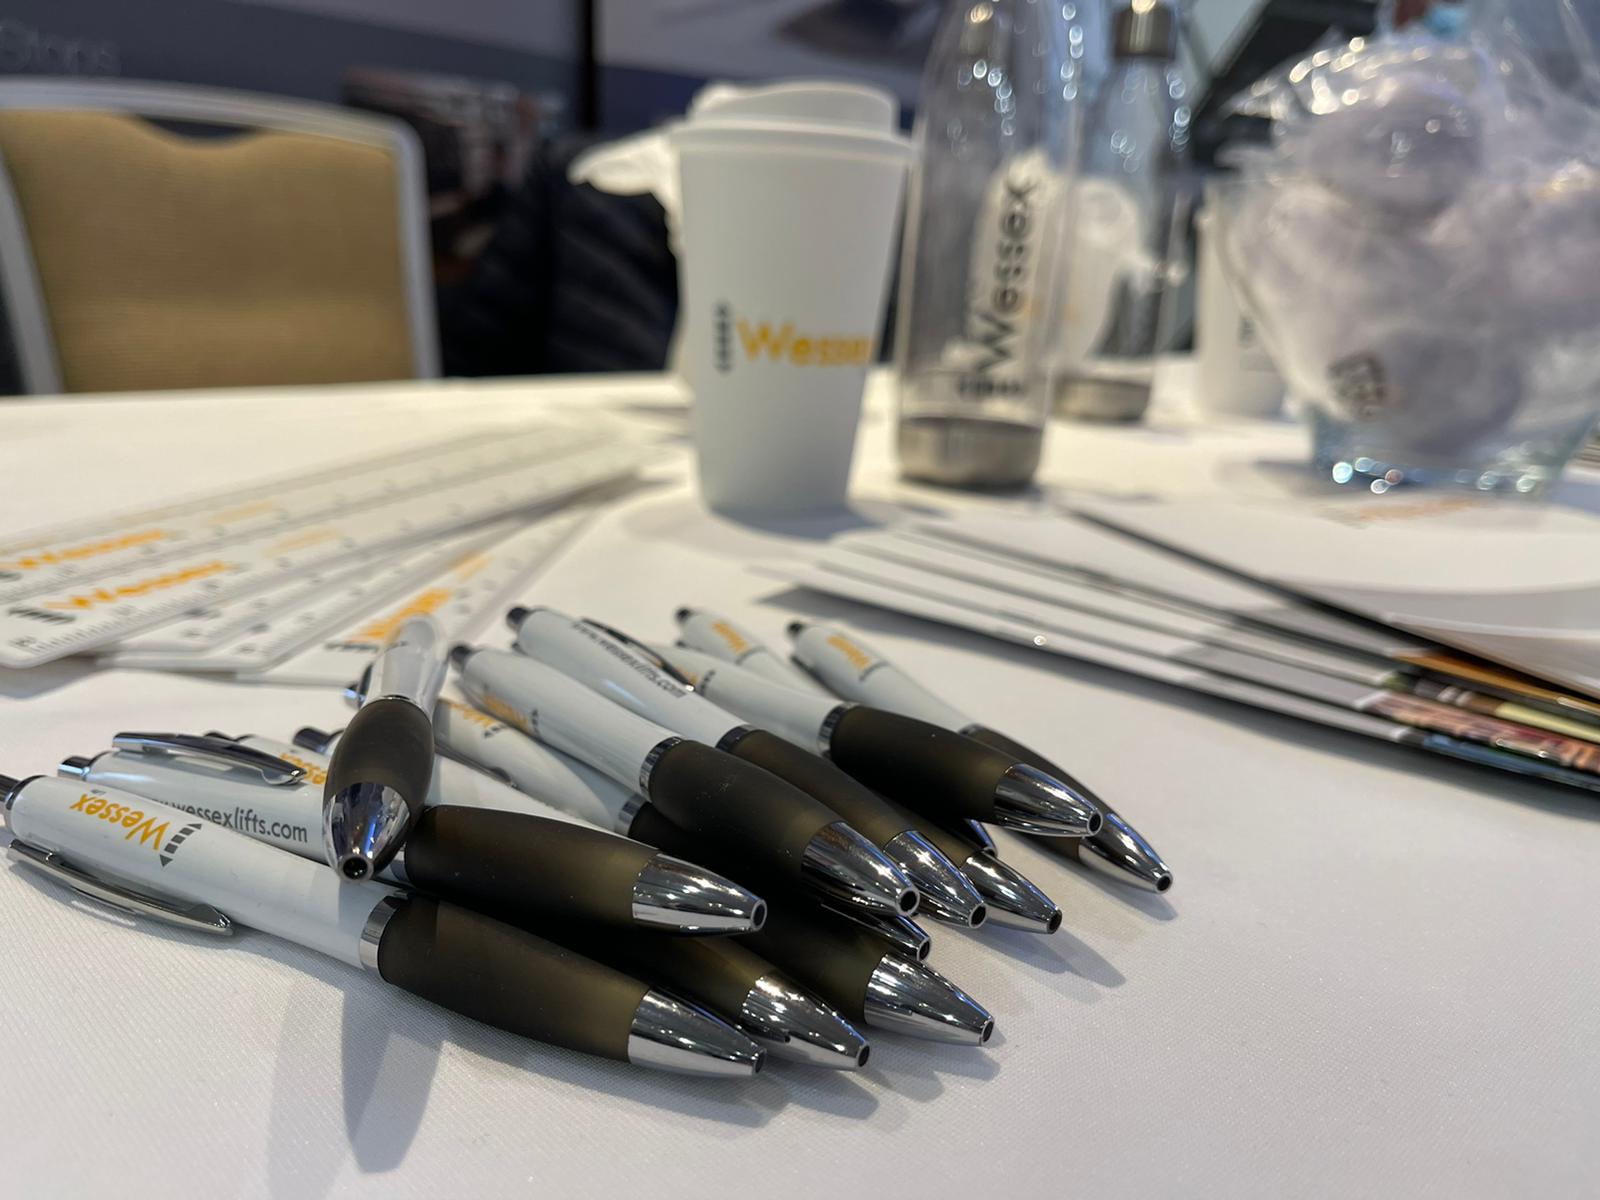 Wessex branded pens, rulers, stress balls, and brouchers on the table for people to pick up, at the OTAC show, Leeds, 2021.